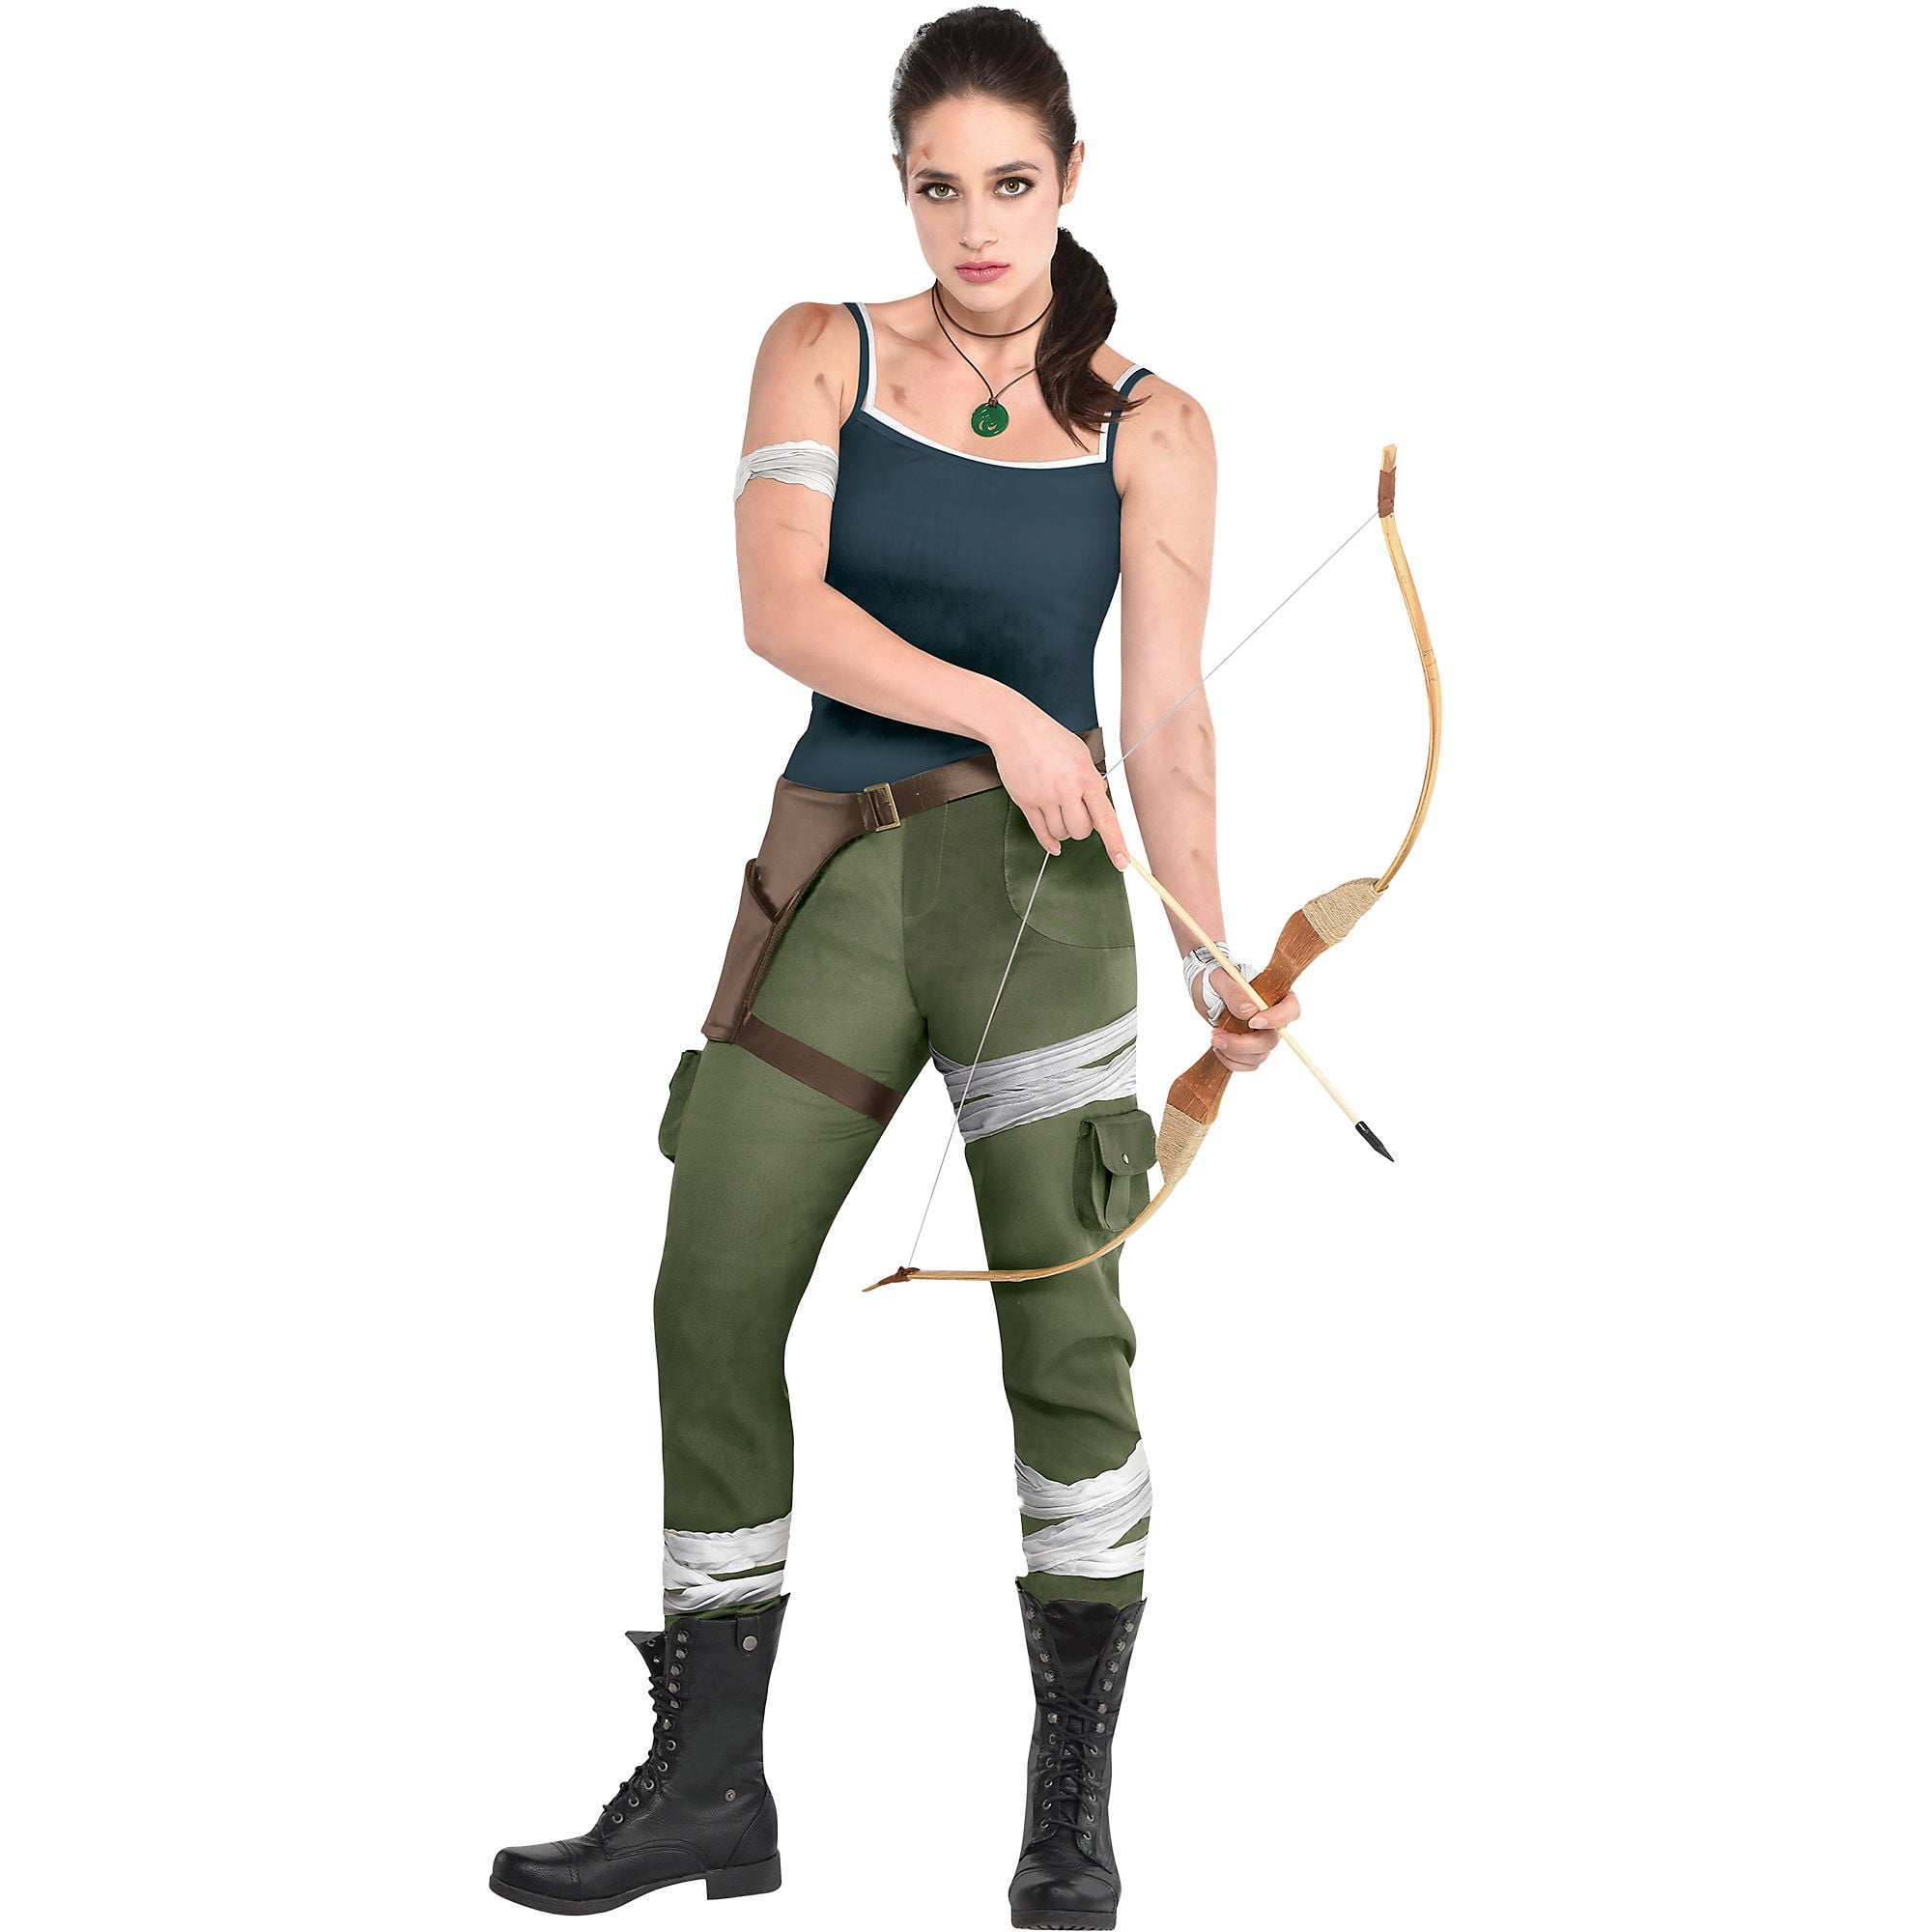 Party City Tomb Raider Video Game Lara Croft Costume for Adults, Includes  Tank Top, Pants, Armband, and More 